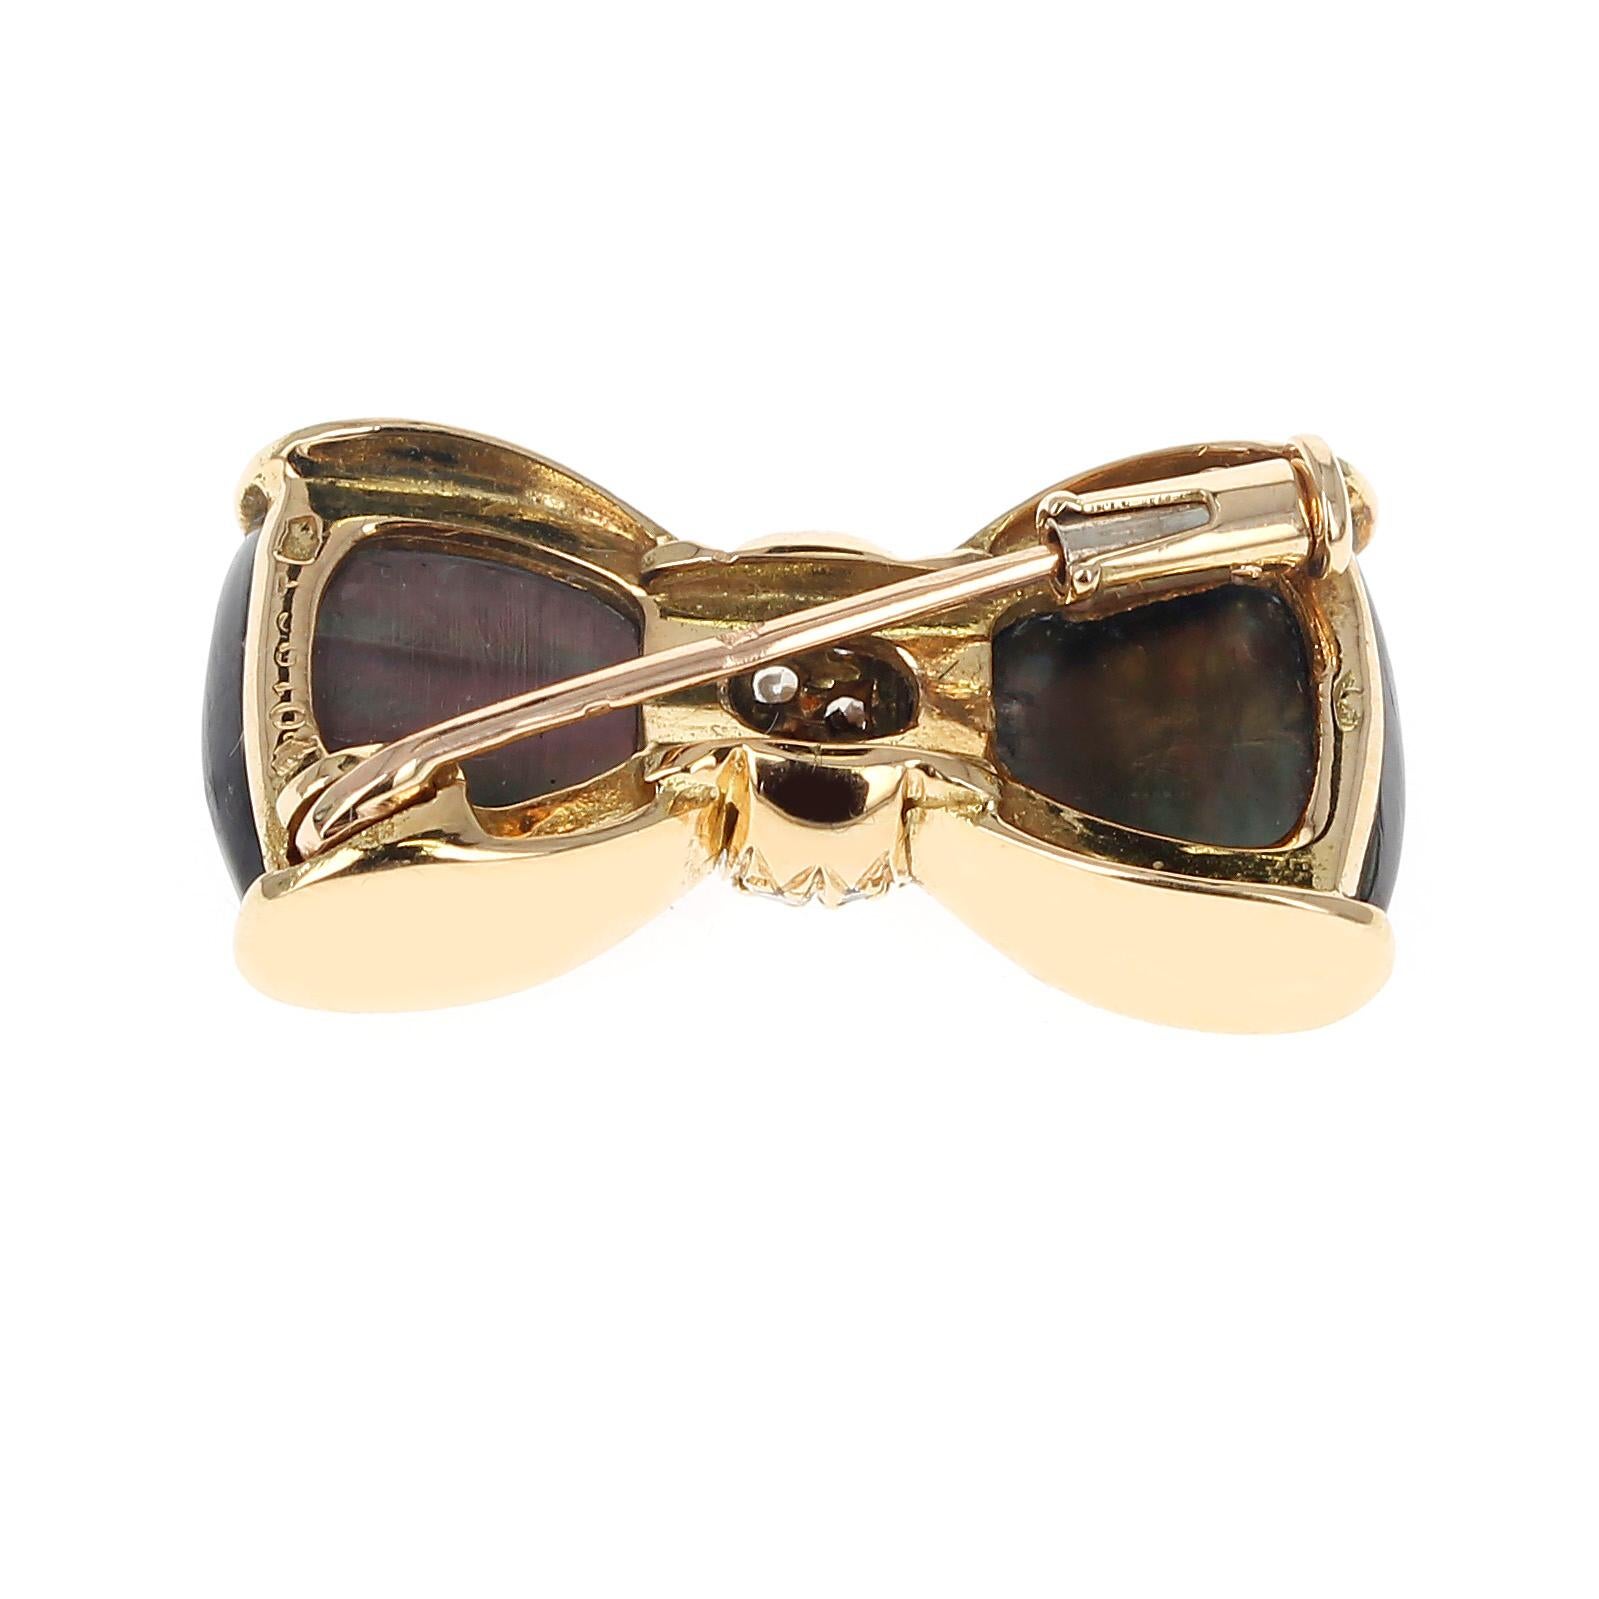 Round Cut Van Cleef & Arpels Labradorite and Diamonds Bow Pin and Brooch, 18k Yellow